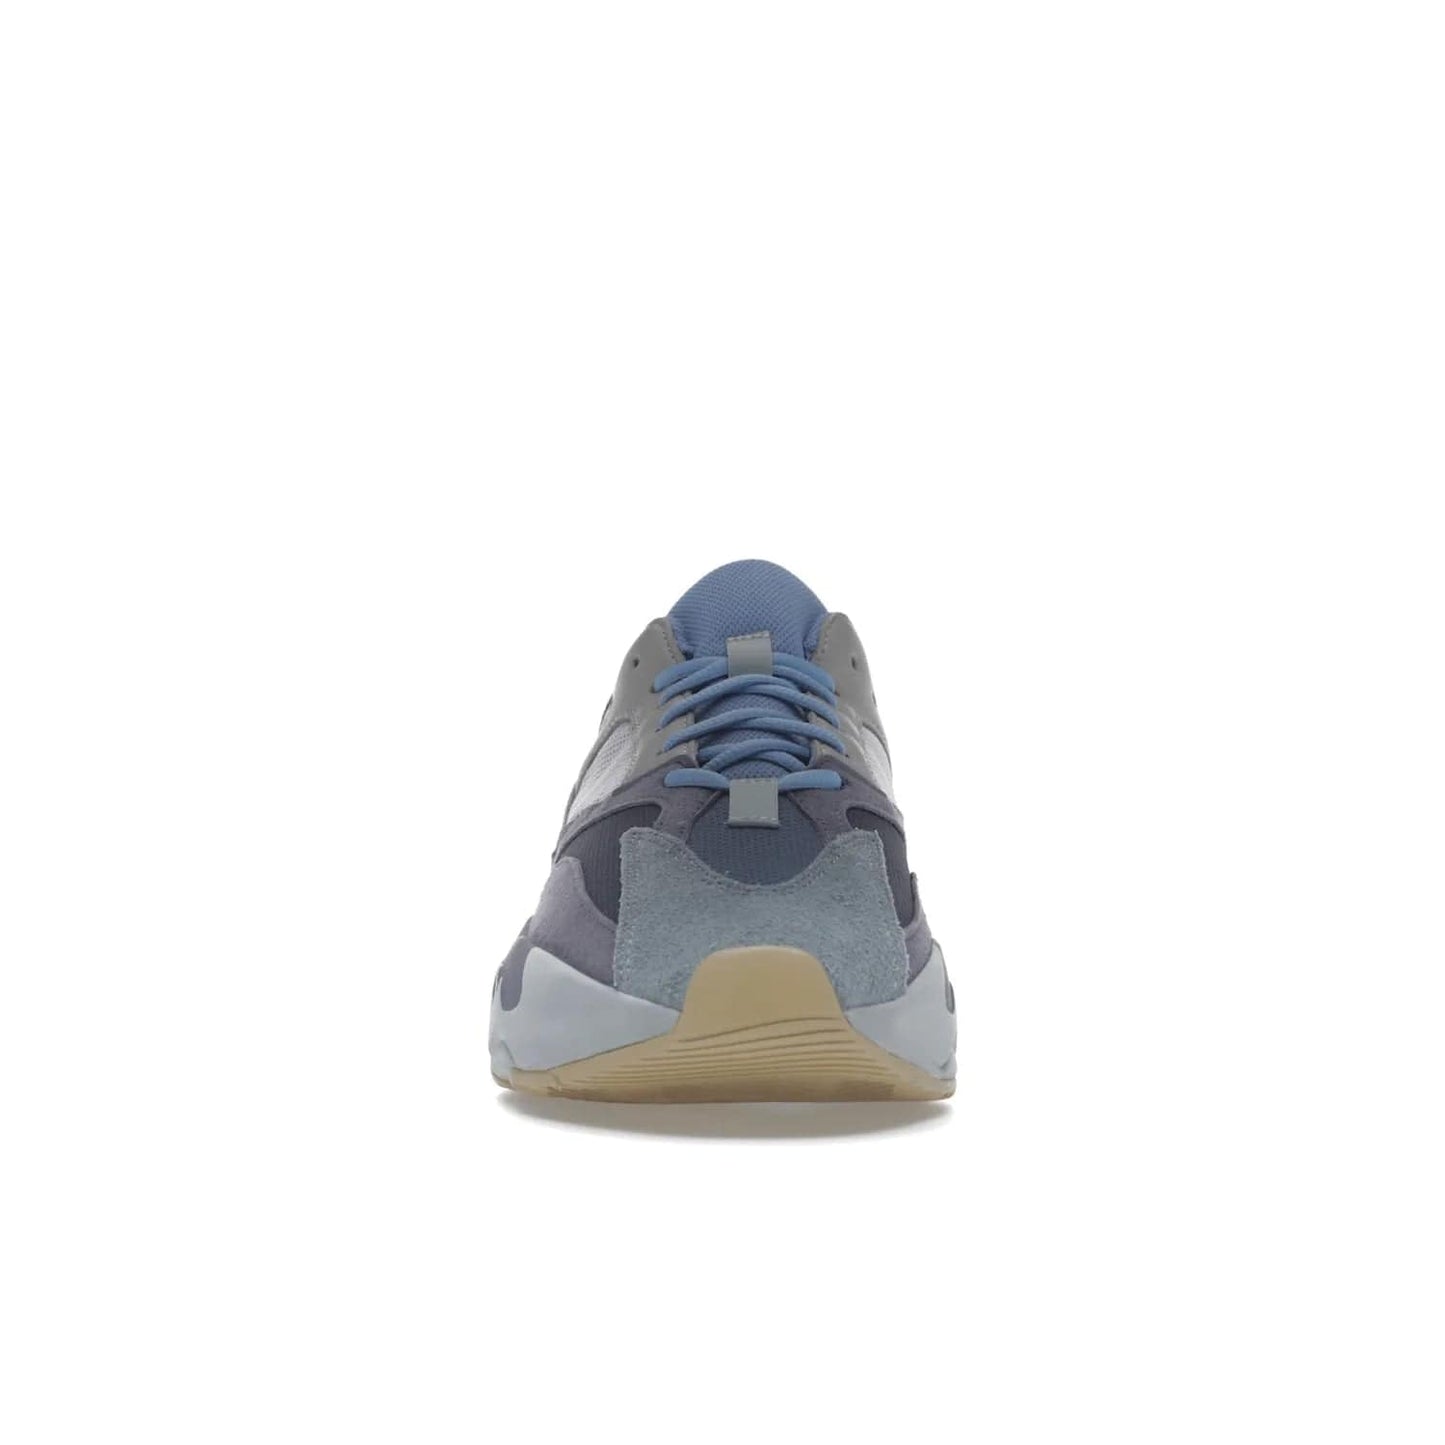 adidas Yeezy Boost 700 Carbon Blue - Image 10 - Only at www.BallersClubKickz.com - Style meets practicality with the adidas Yeezy Boost 700 Carbon Blue. Tonal grey and carbon blue mix of suede and mesh upper, grey midsole and gum outsole. Get yours today.